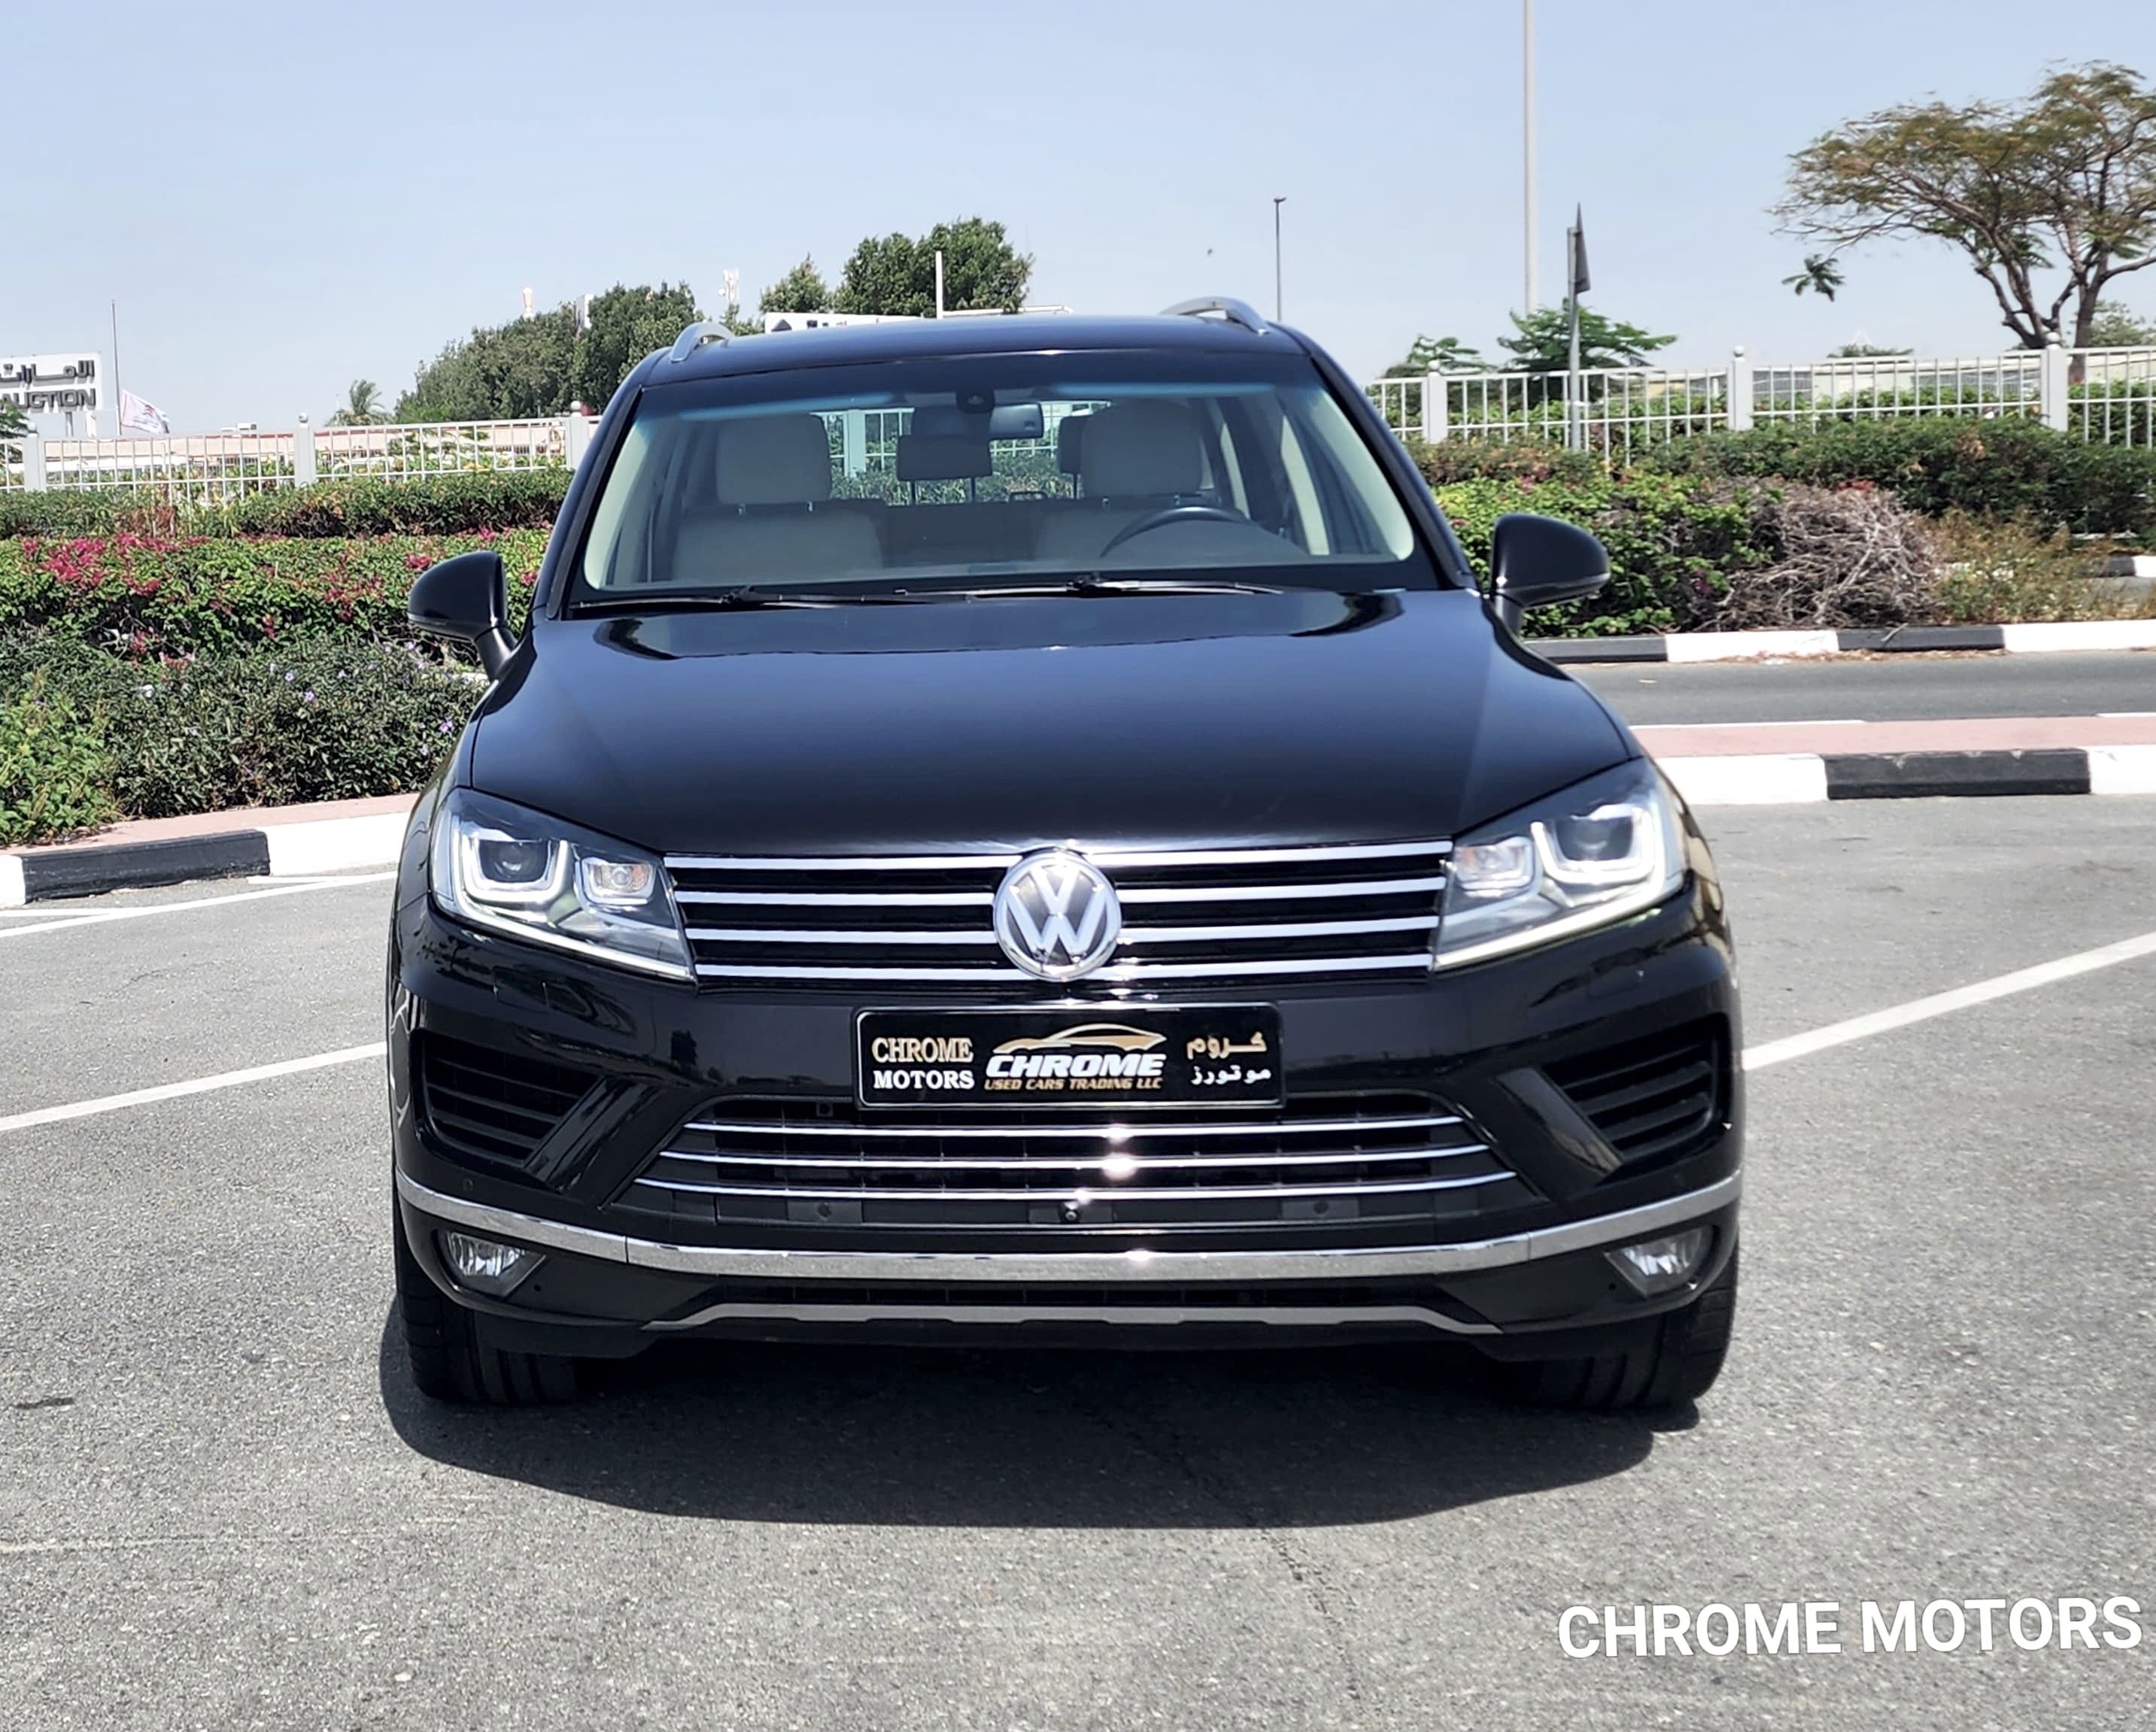 2016 VOLKSWAGEN TOUAREG SPORT, 5DR SUV, 3.6L 6CYL PETROL, AUTOMATIC, FOUR WHEEL DRIVE IN EXCELLENT CONDITION